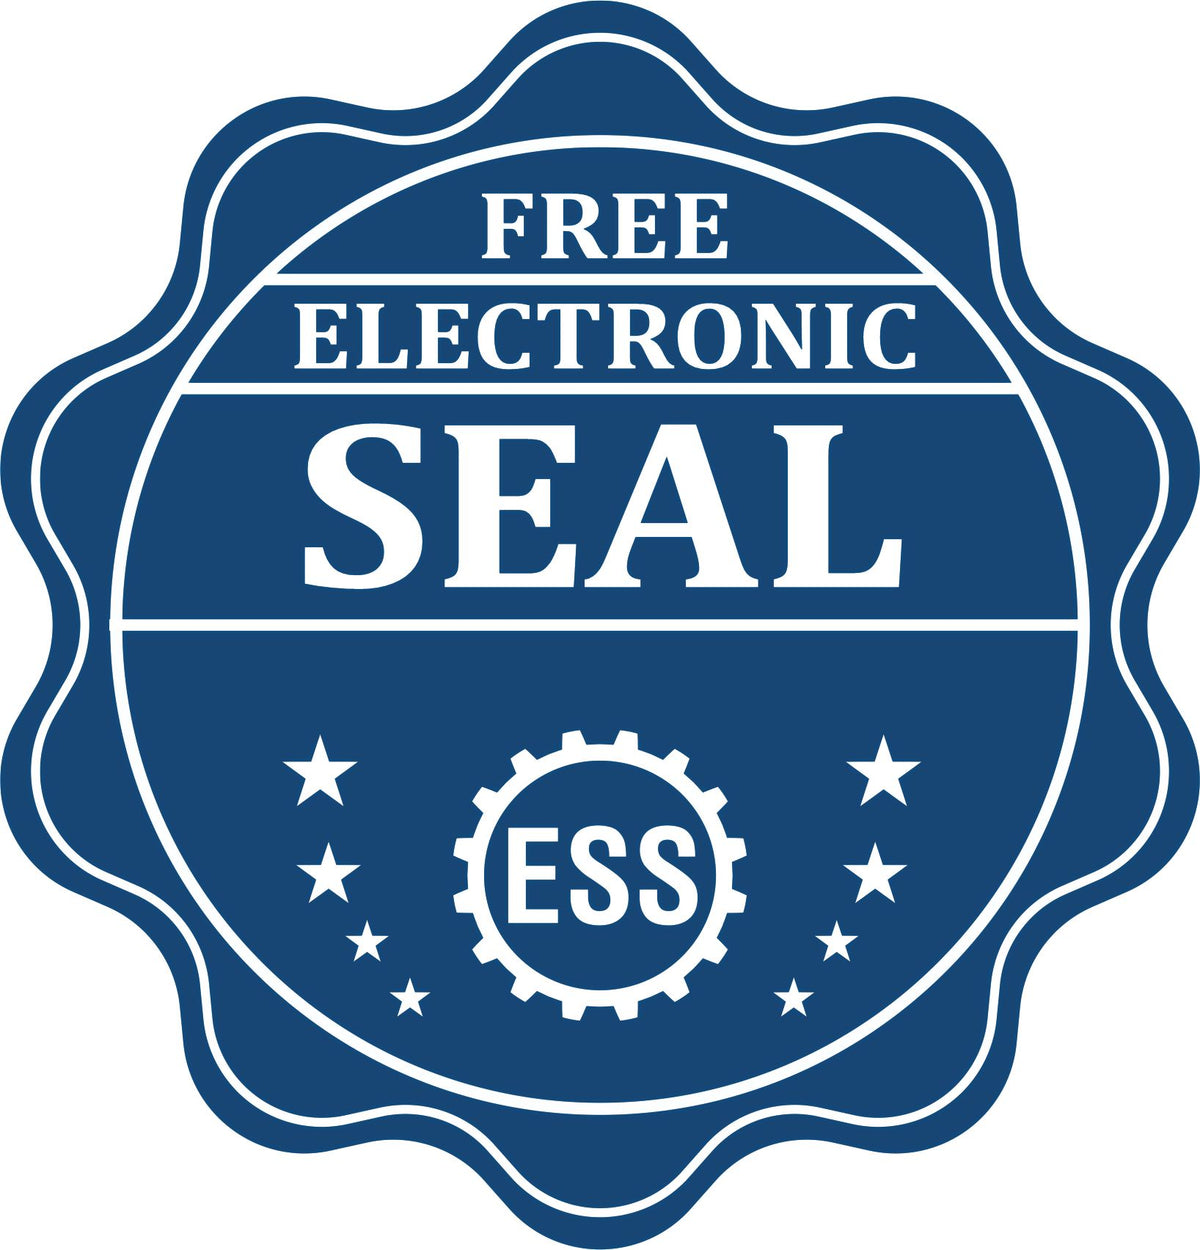 A badge showing a free electronic seal for the Slim Pre-Inked New York Architect Seal Stamp with stars and the ESS gear on the emblem.